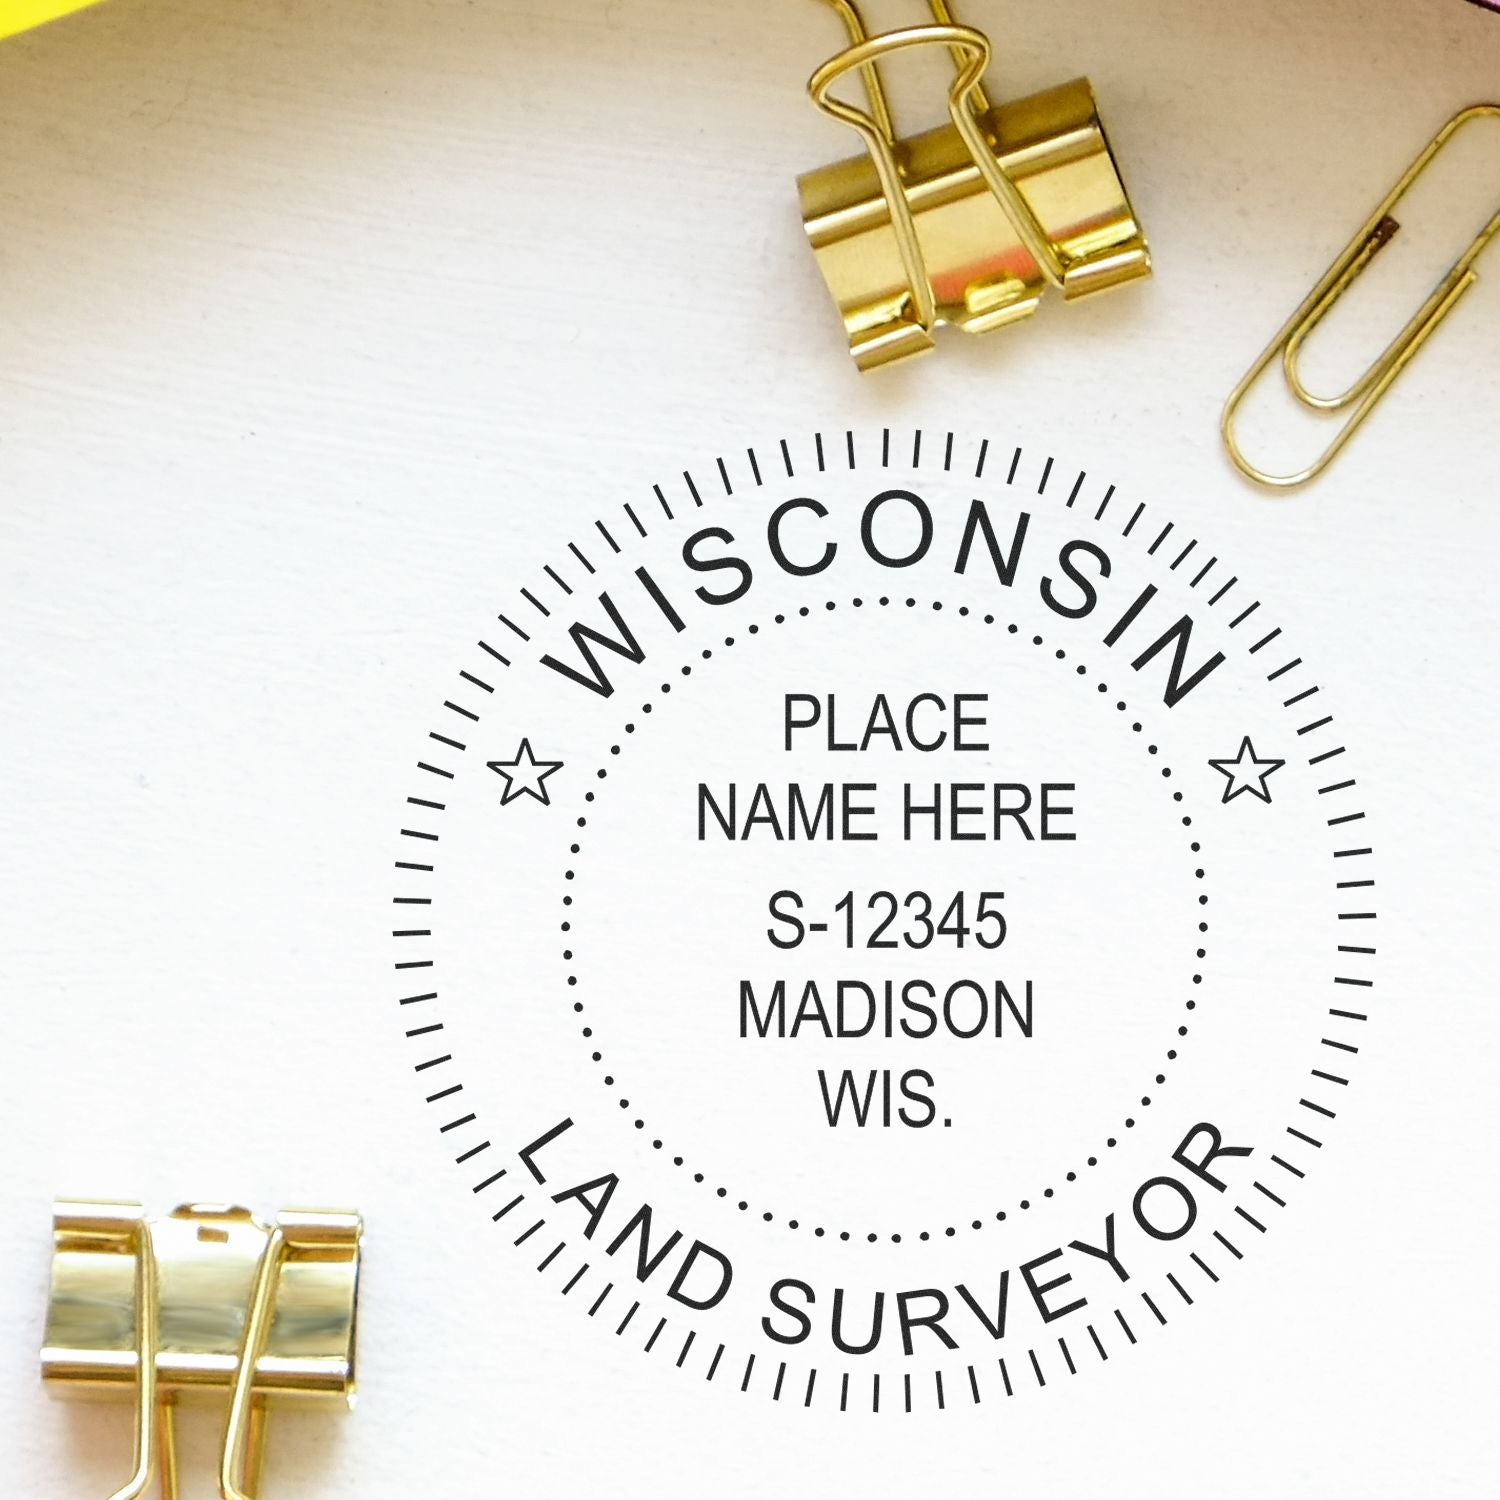 Power Up Your Practice with a Wisconsin Land Surveyor Seal Feature Image